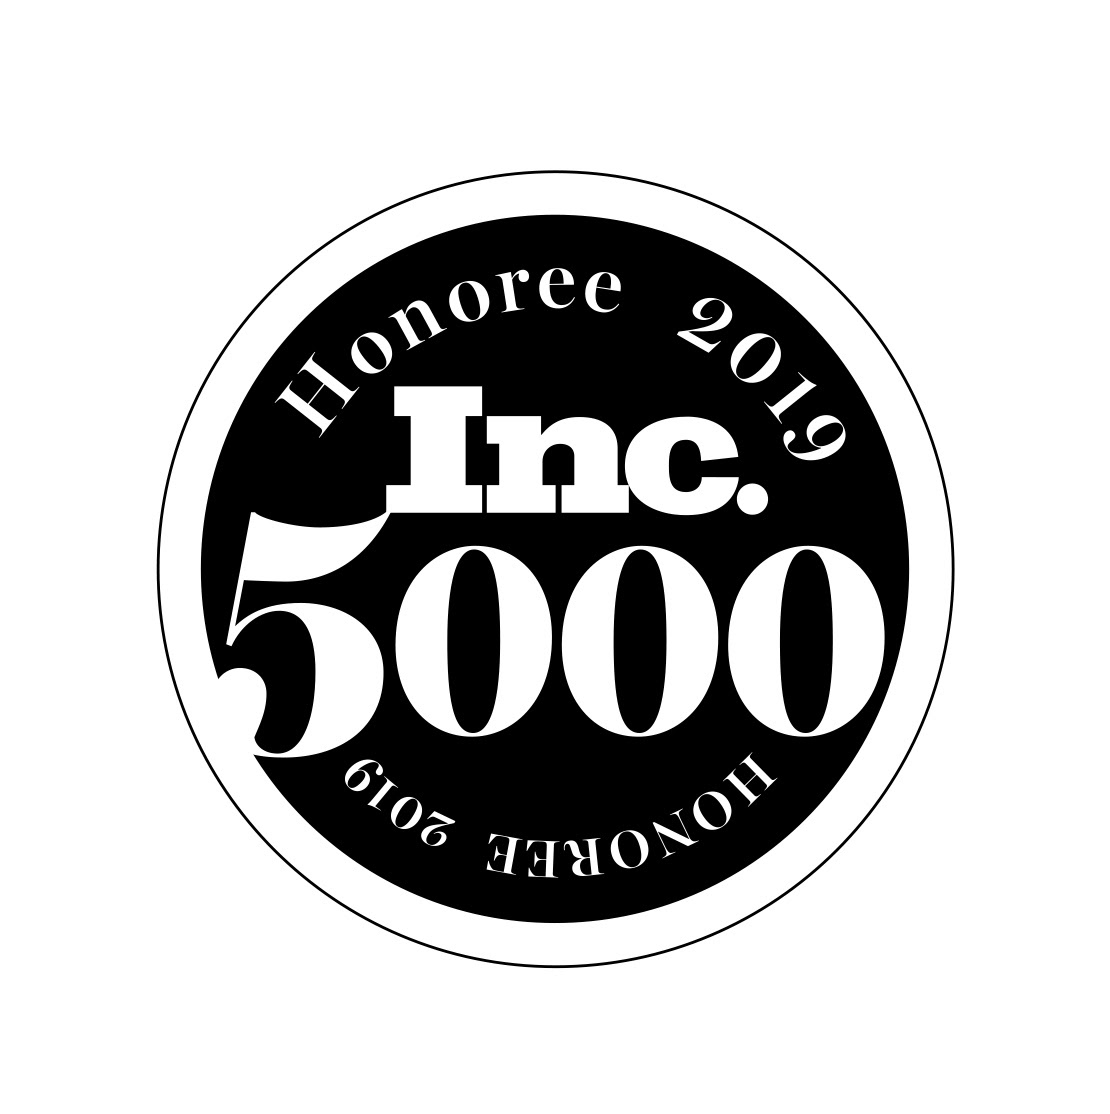 KW Property Management & Consulting Honored as one of America’s Fastest-Growing Private Companies in Inc. Magazine’s Annual Inc. 5000 List